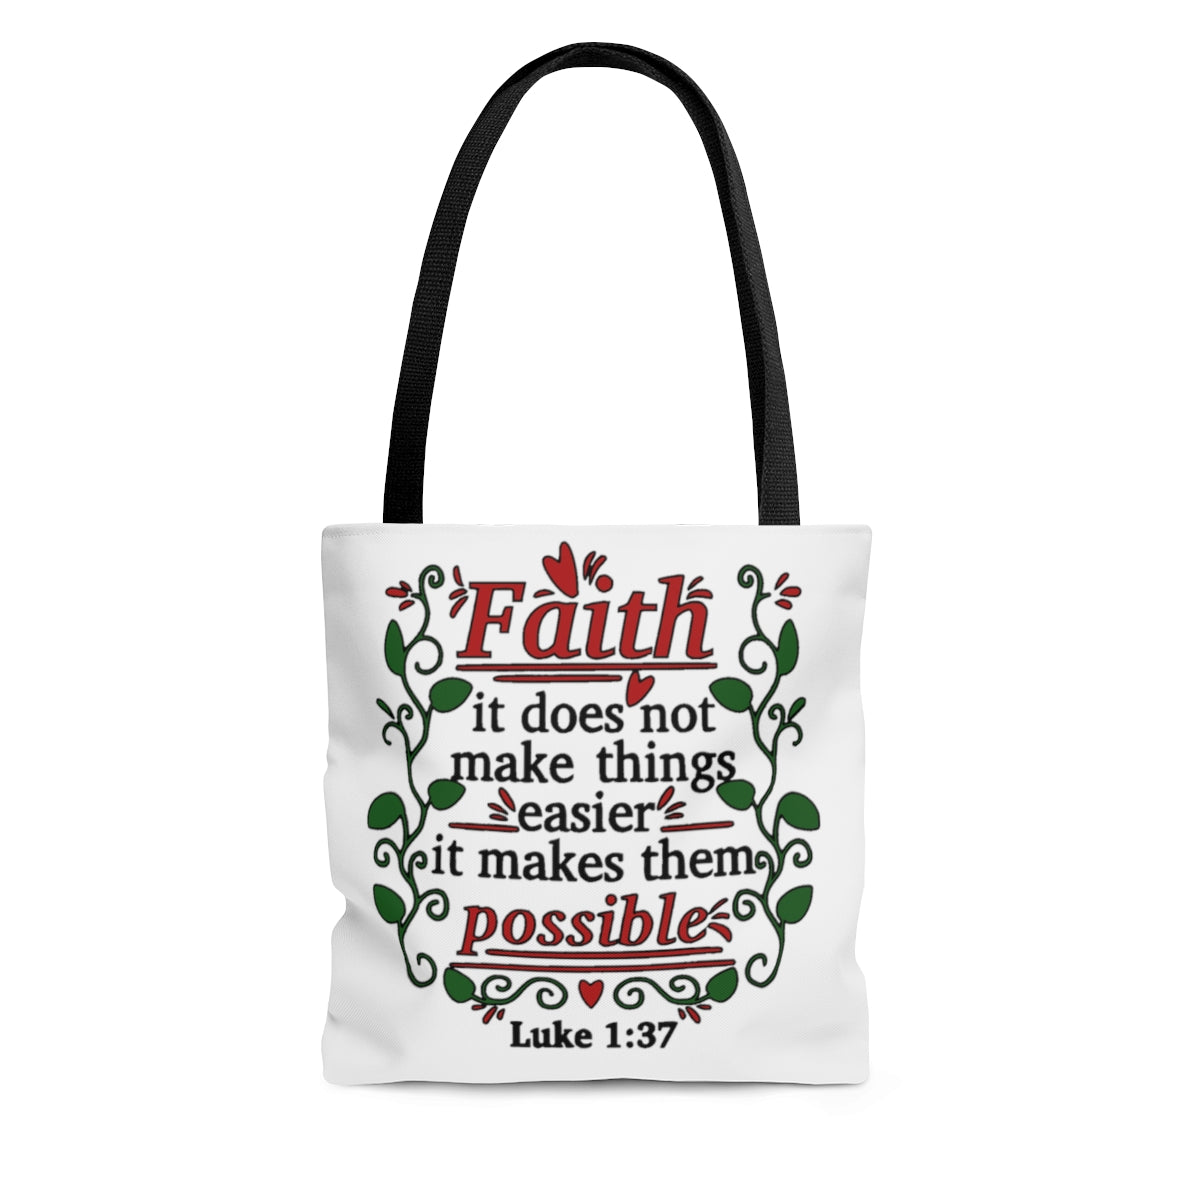 Faith It Does Not Make Things Easier It Makes Them Possible Luke 1:37 Tote bag